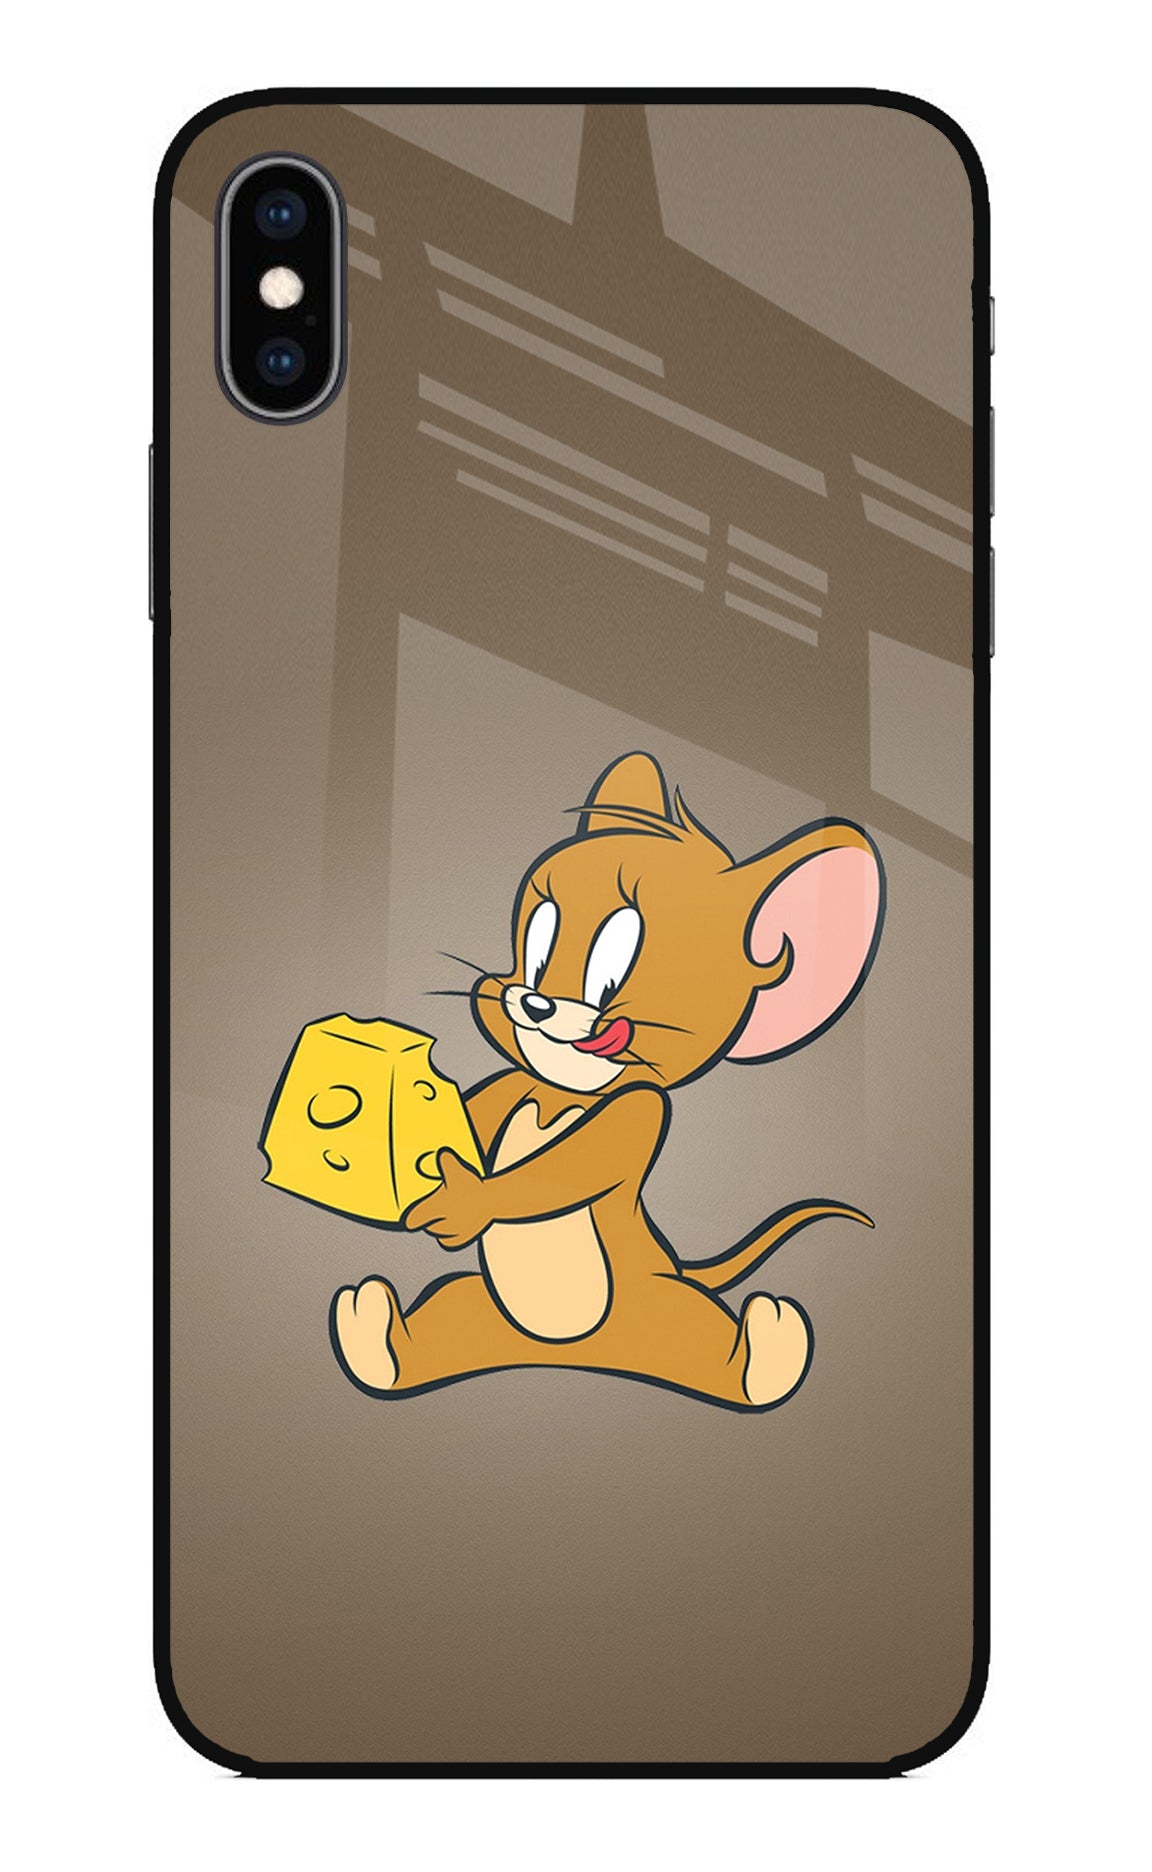 Jerry iPhone XS Max Back Cover